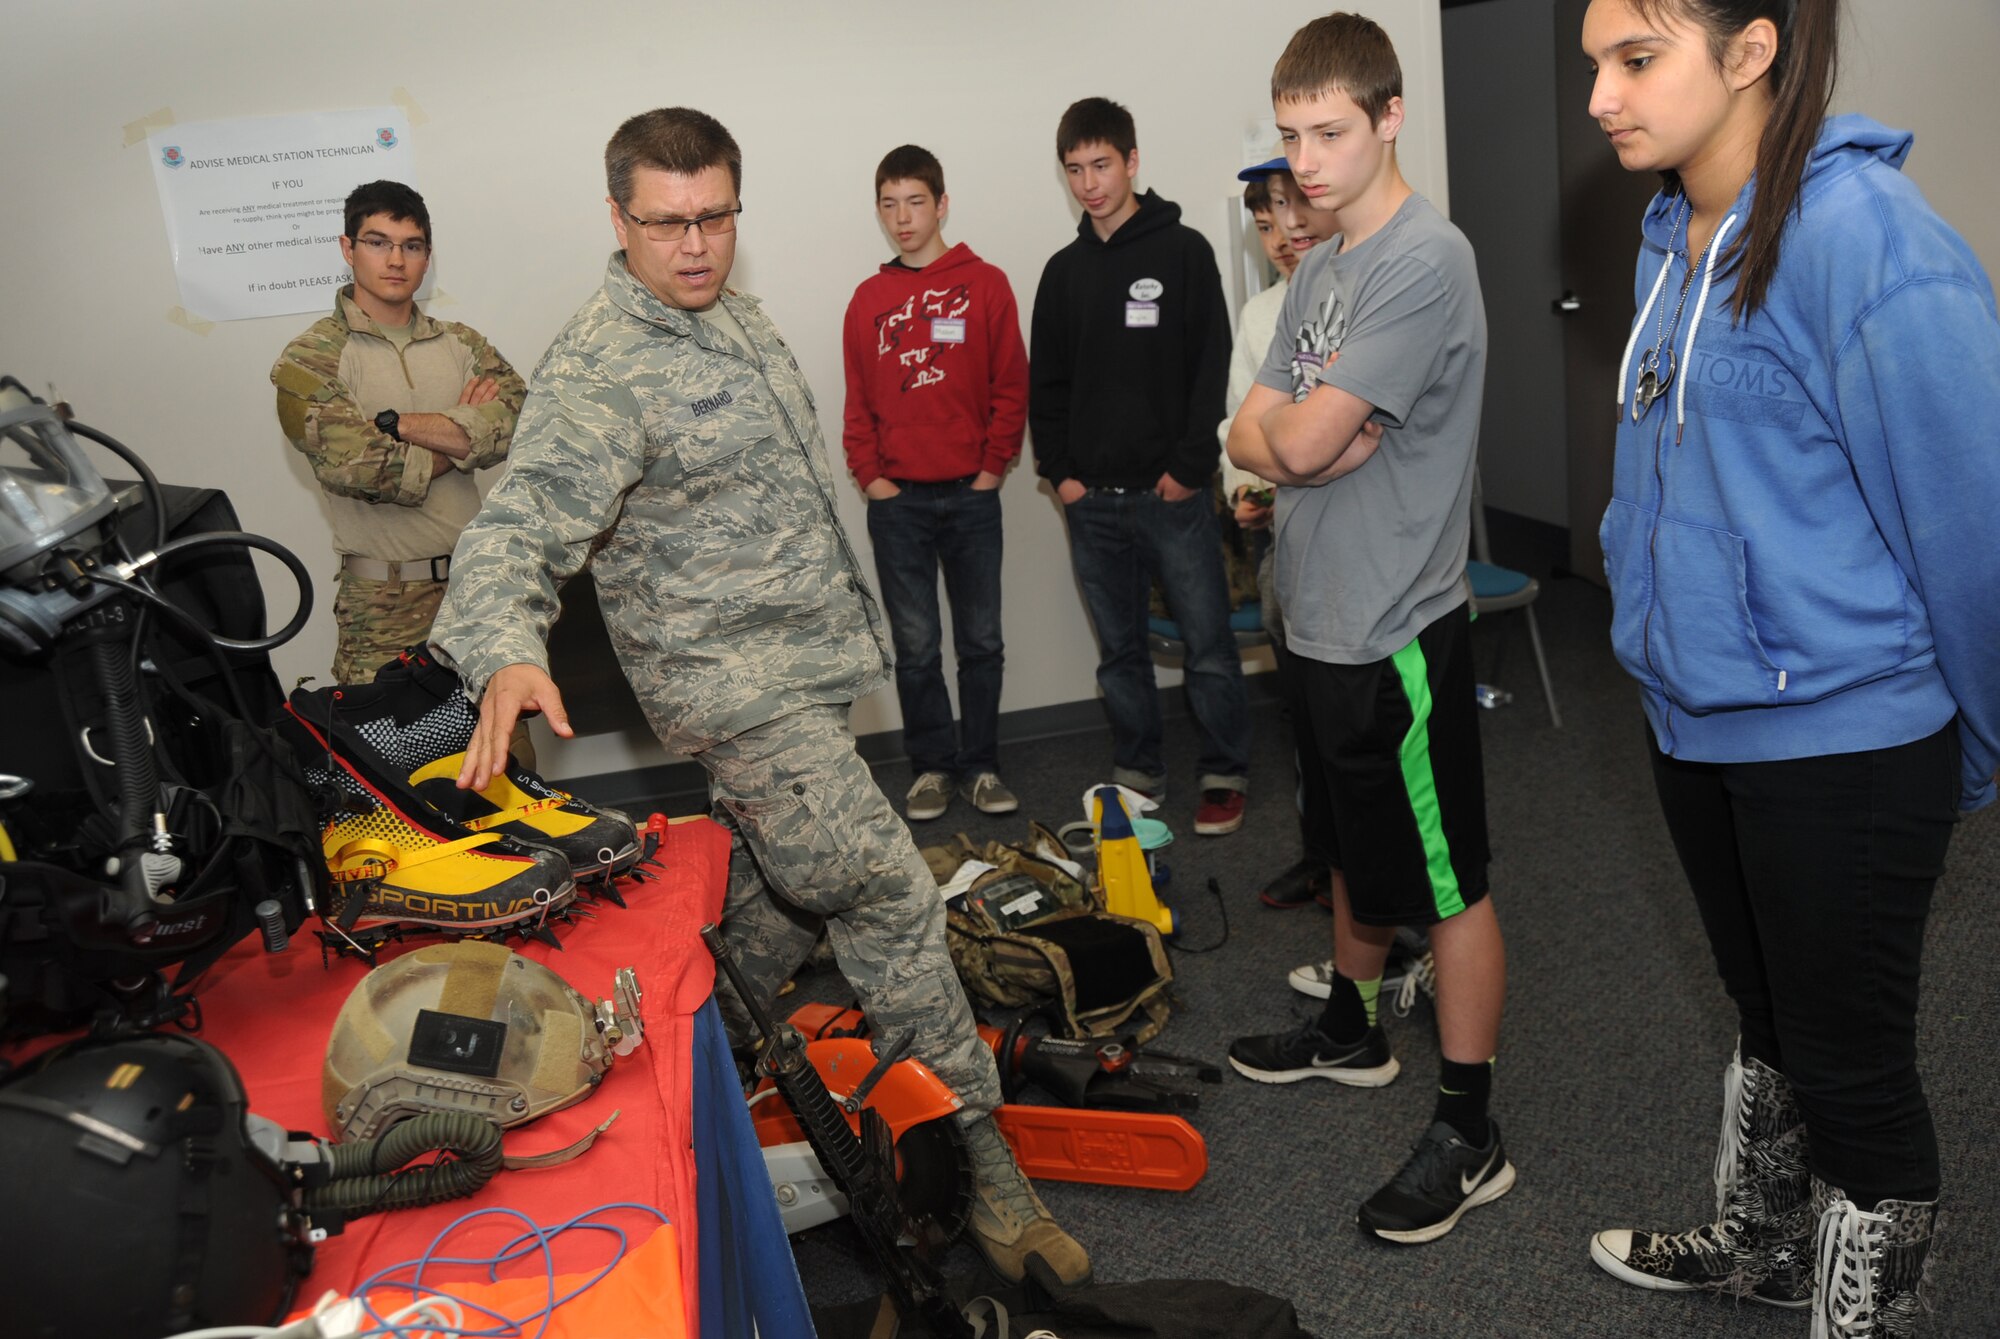 Air Force Maj. Chris Bernard, assigned to the 304th Rescue Squadron, Portland Air National Guard Base, Ore., describes most of the gear his team use to help in search and recovery efforts to a group of teenagers attending ‘Kids Day at PANG’, April 25, 2015. The Oregon National Guard opened the Portland Air Base to children of military members for a special day of activities highlighting “The Month of the Military Child,” designated since 1986 by the Department of Defense as way to recognize the contribution and personal sacrifices children make to the military. (U.S. Air National Guard photo by Tech. Sgt. John Hughel, 142nd Fighter Wing Public Affairs/Released)